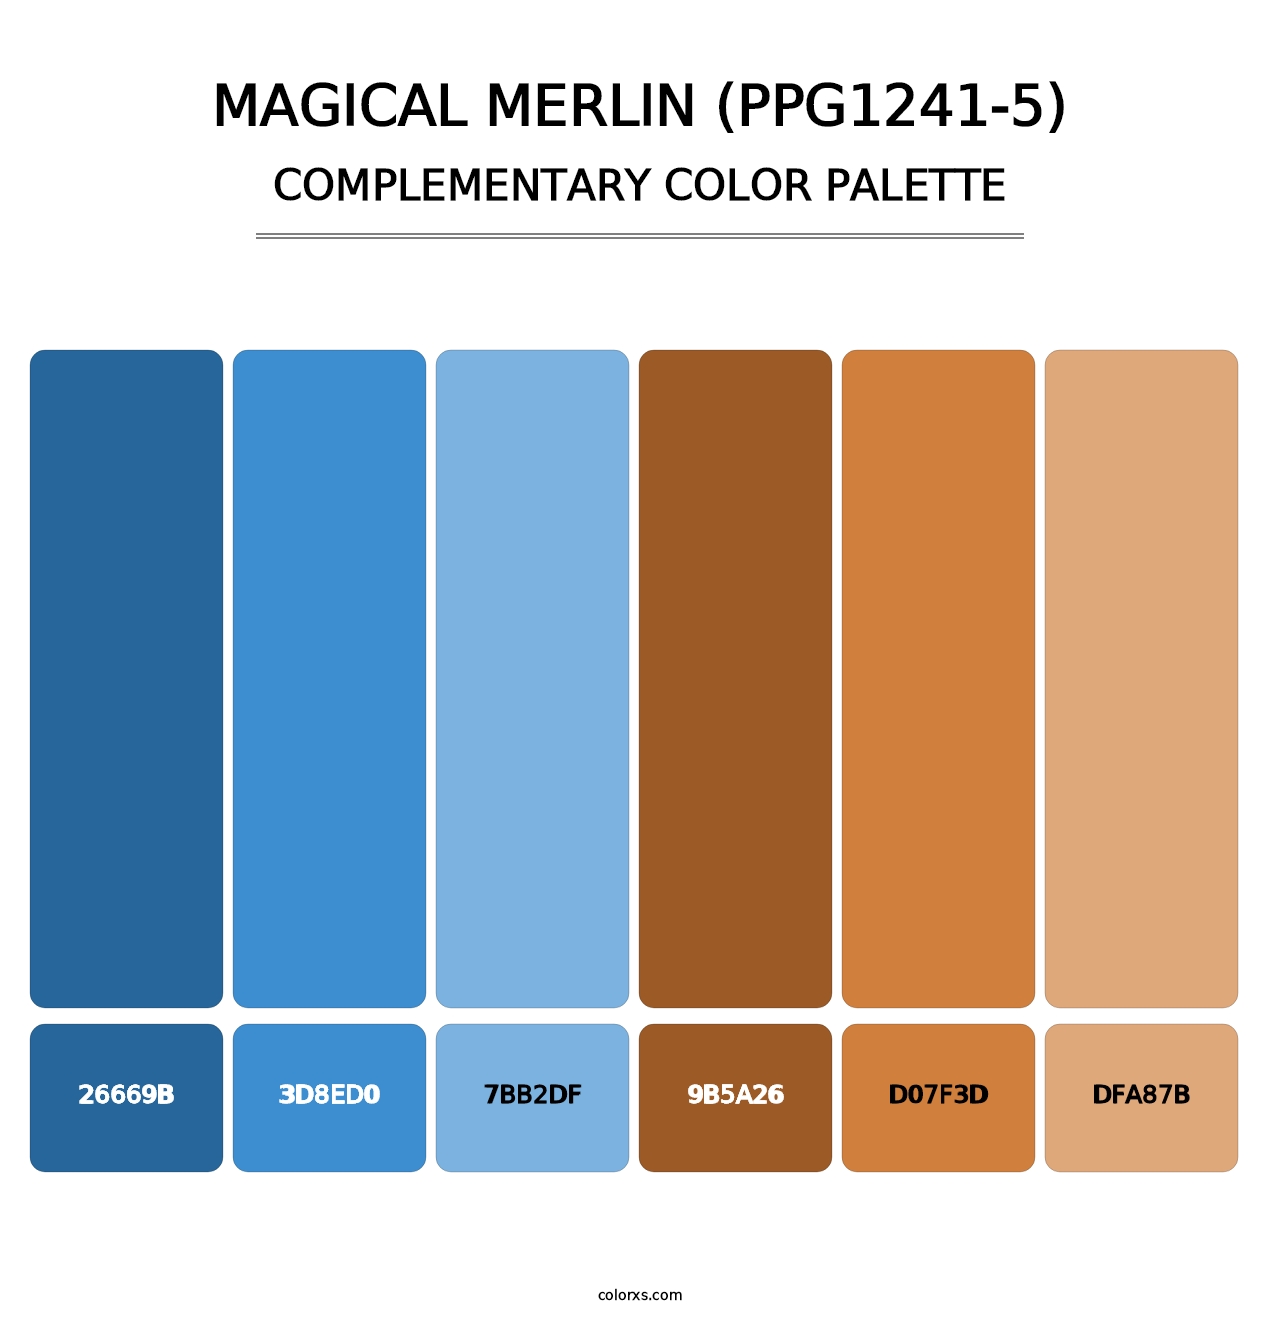 Magical Merlin (PPG1241-5) - Complementary Color Palette